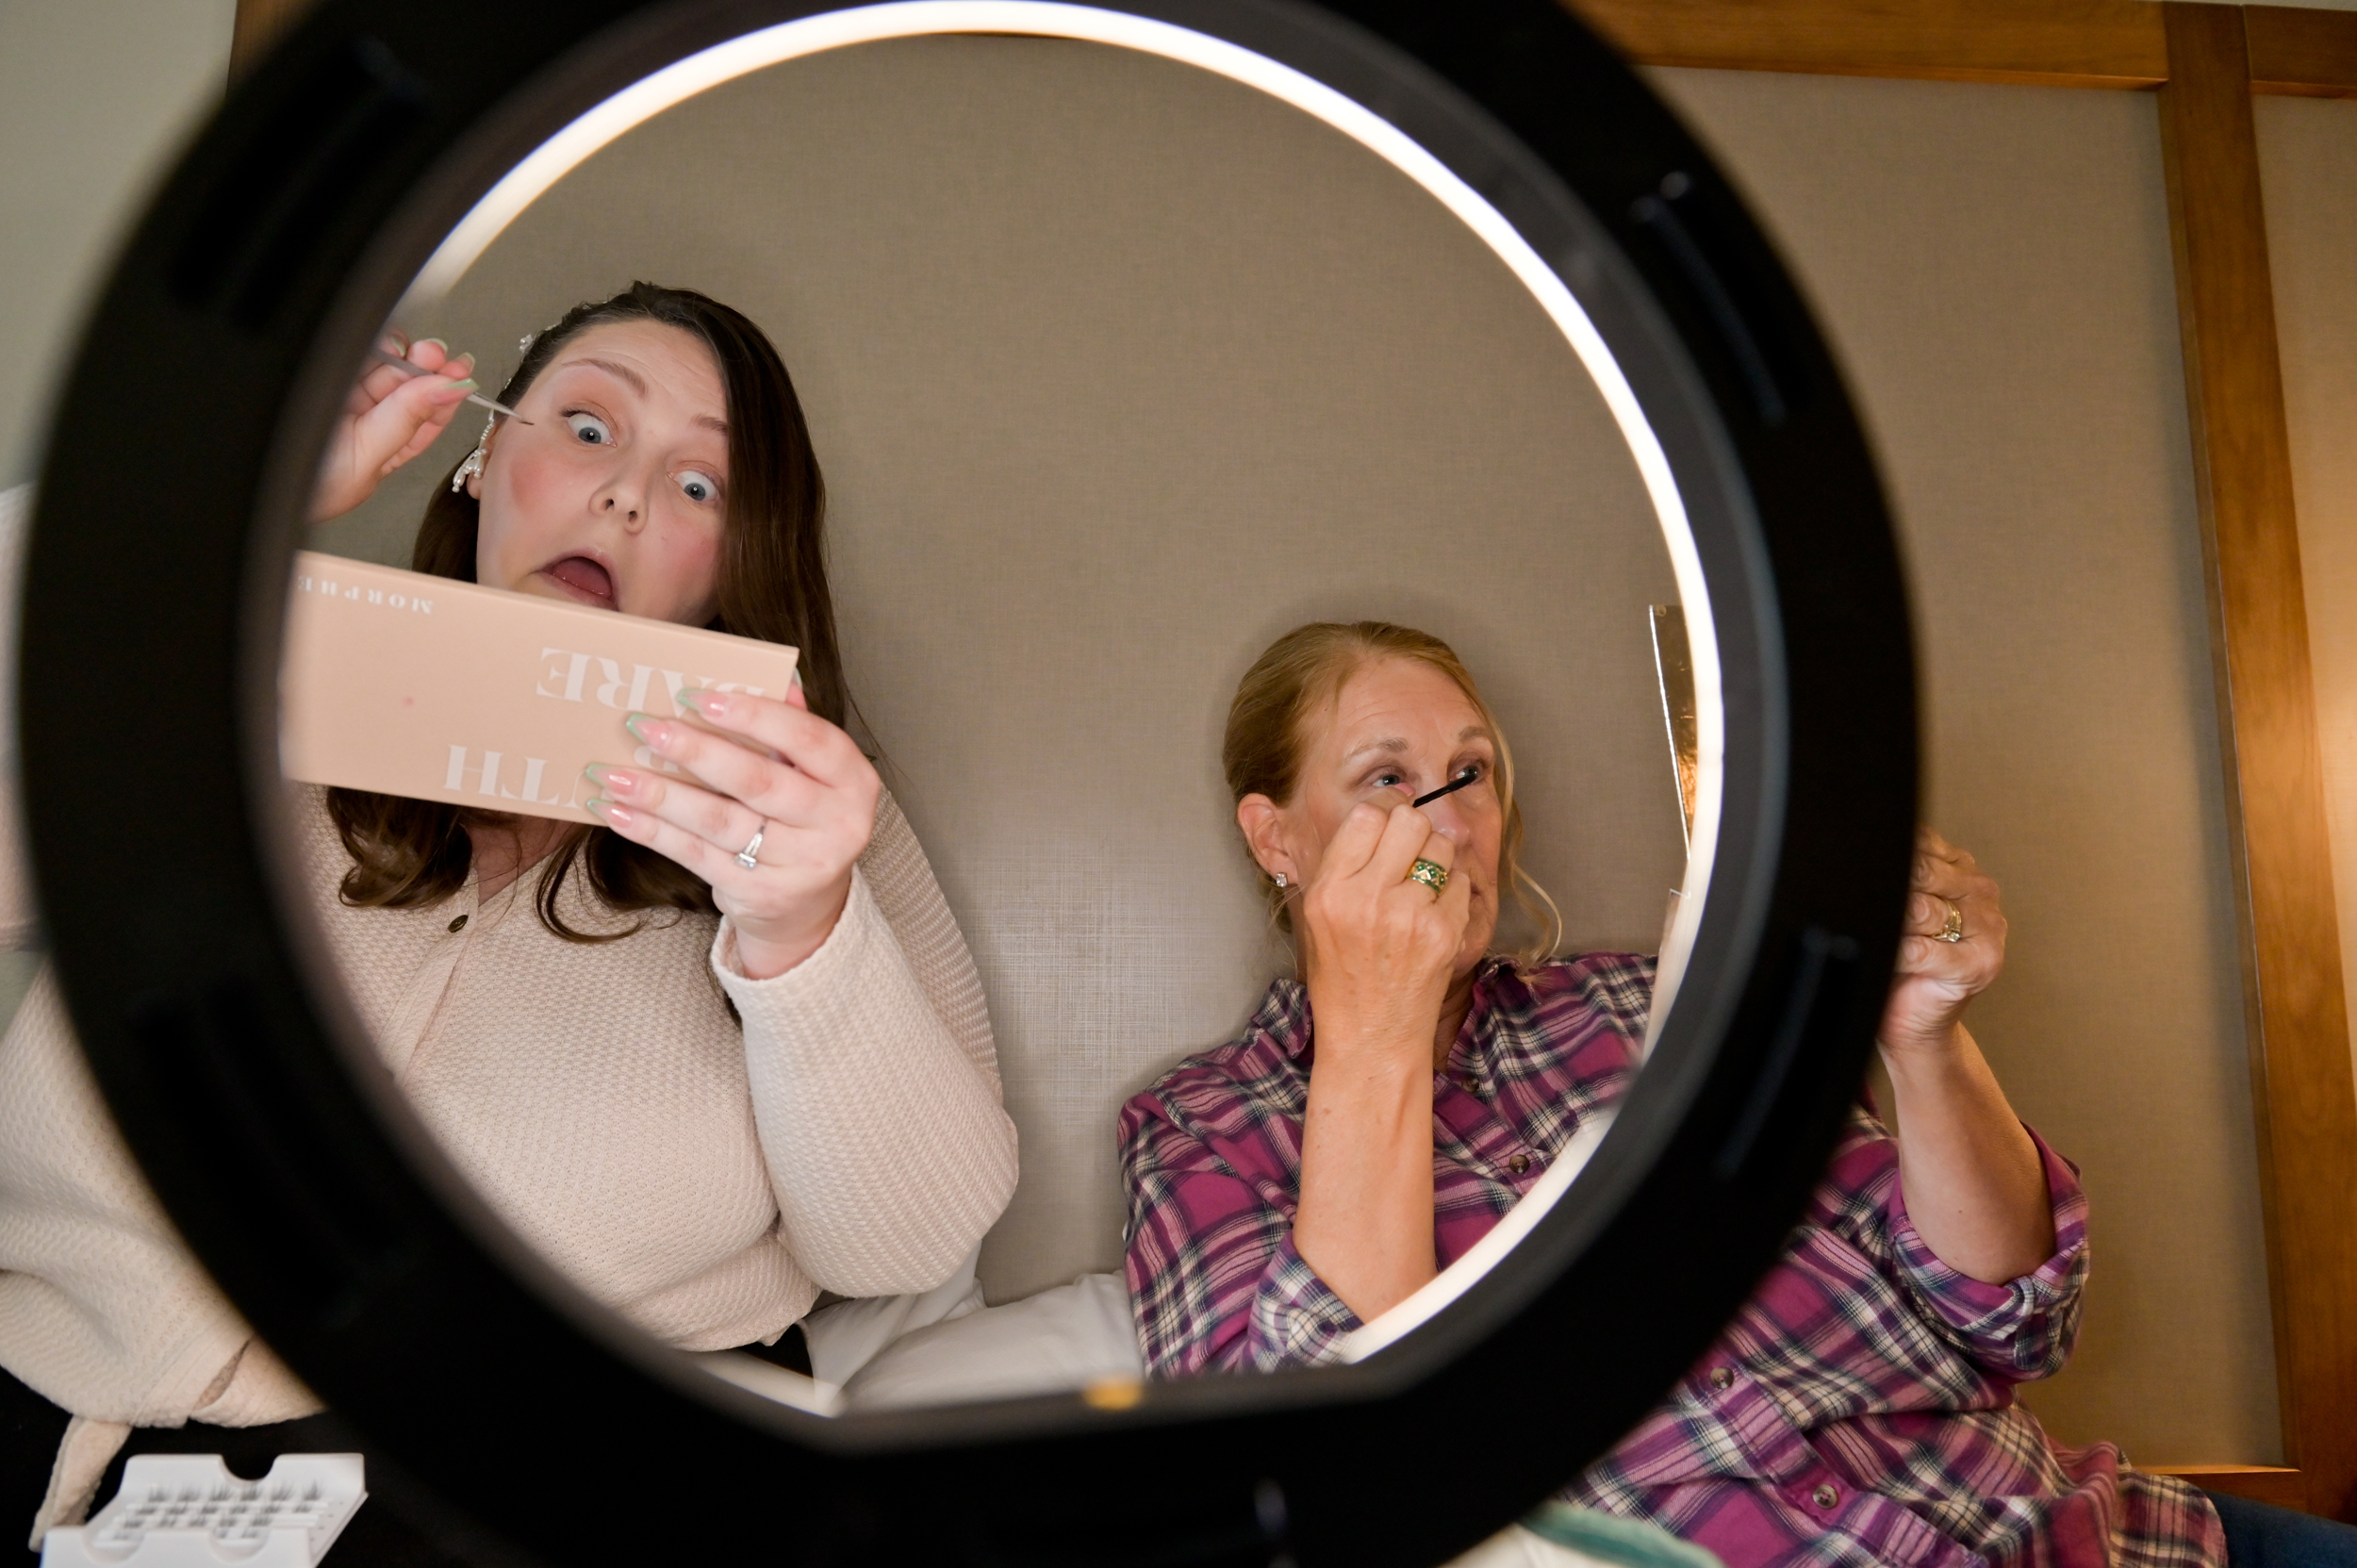 Mother and daughter share a ring light while they get ready together for the wedding in Grand Blanc, Michigan.